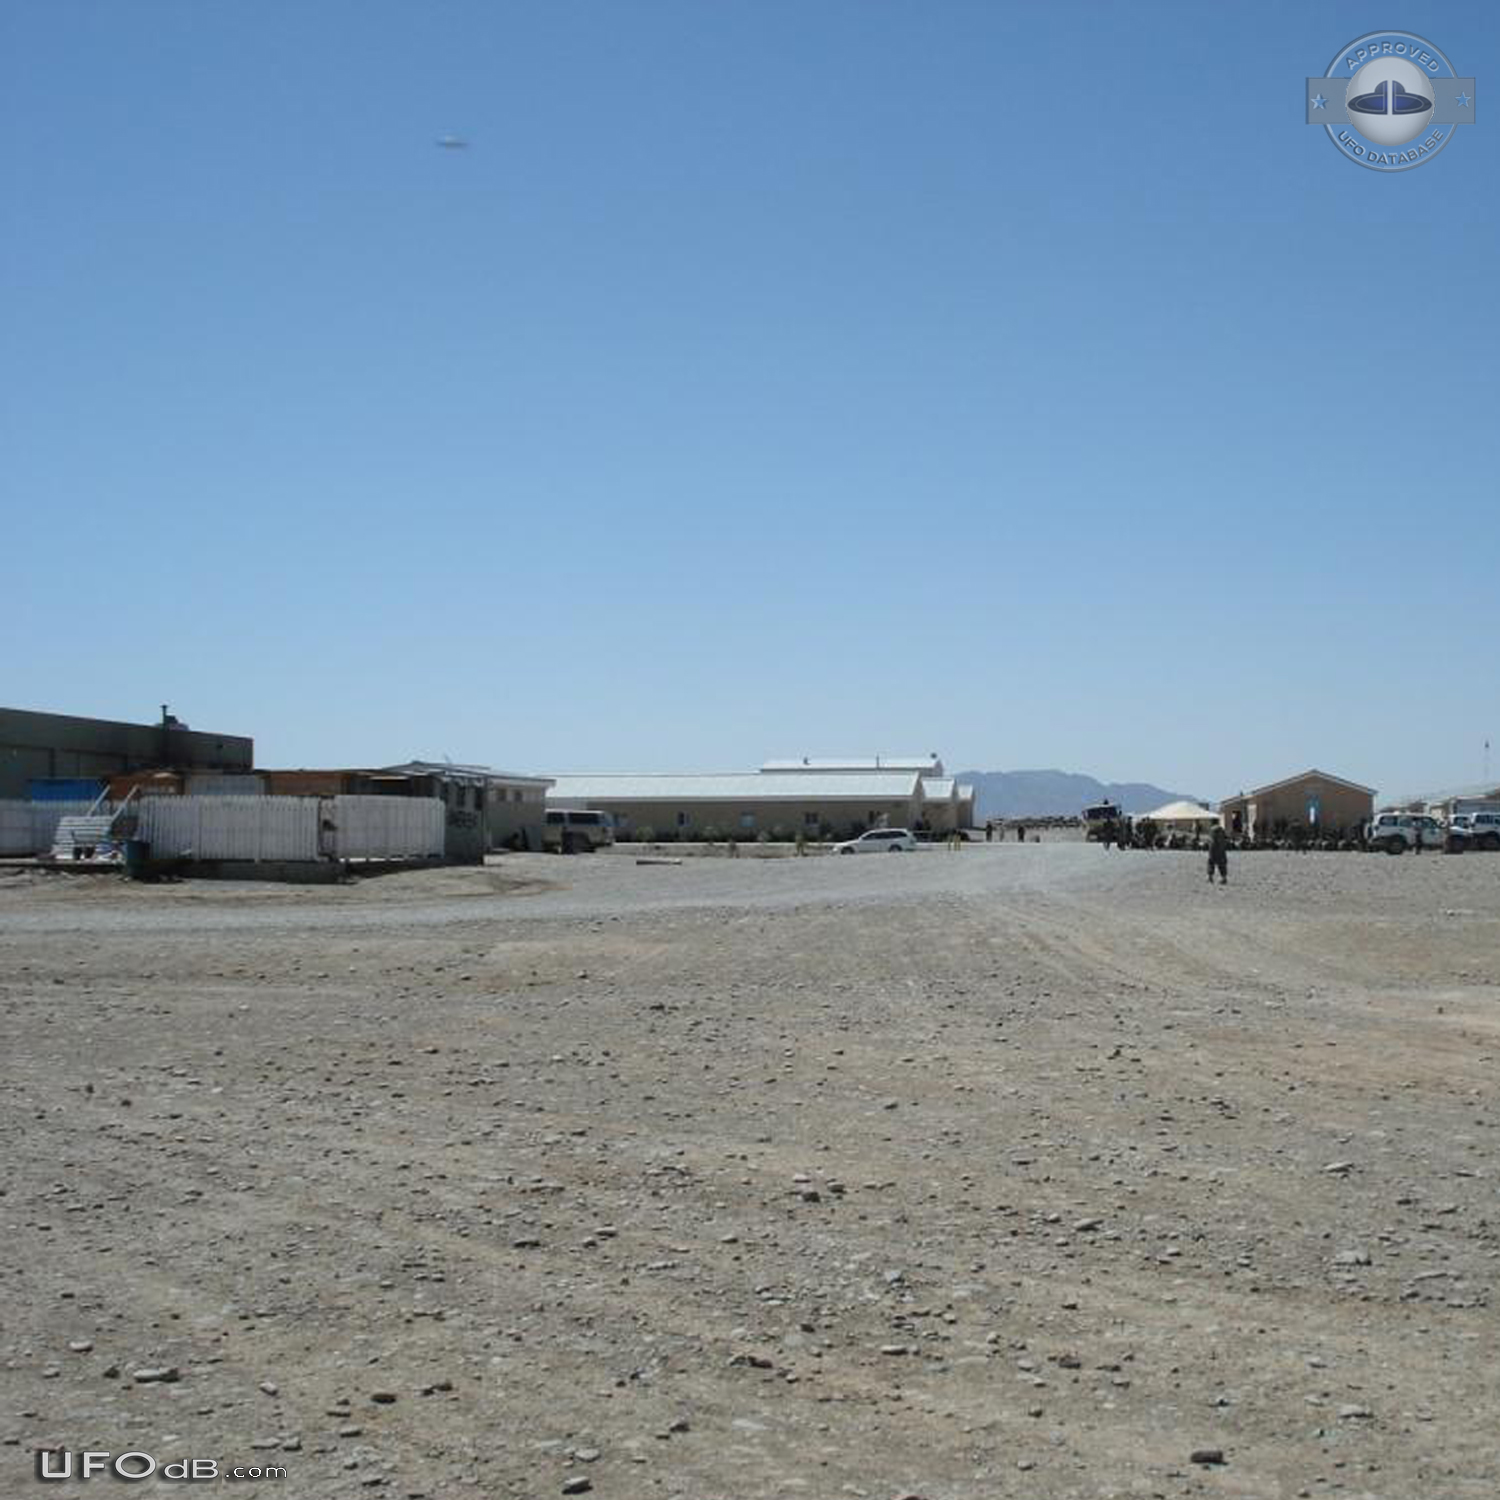 Object captured when taking photo at NATO base site Kandahar Afghanist UFO Picture #748-2